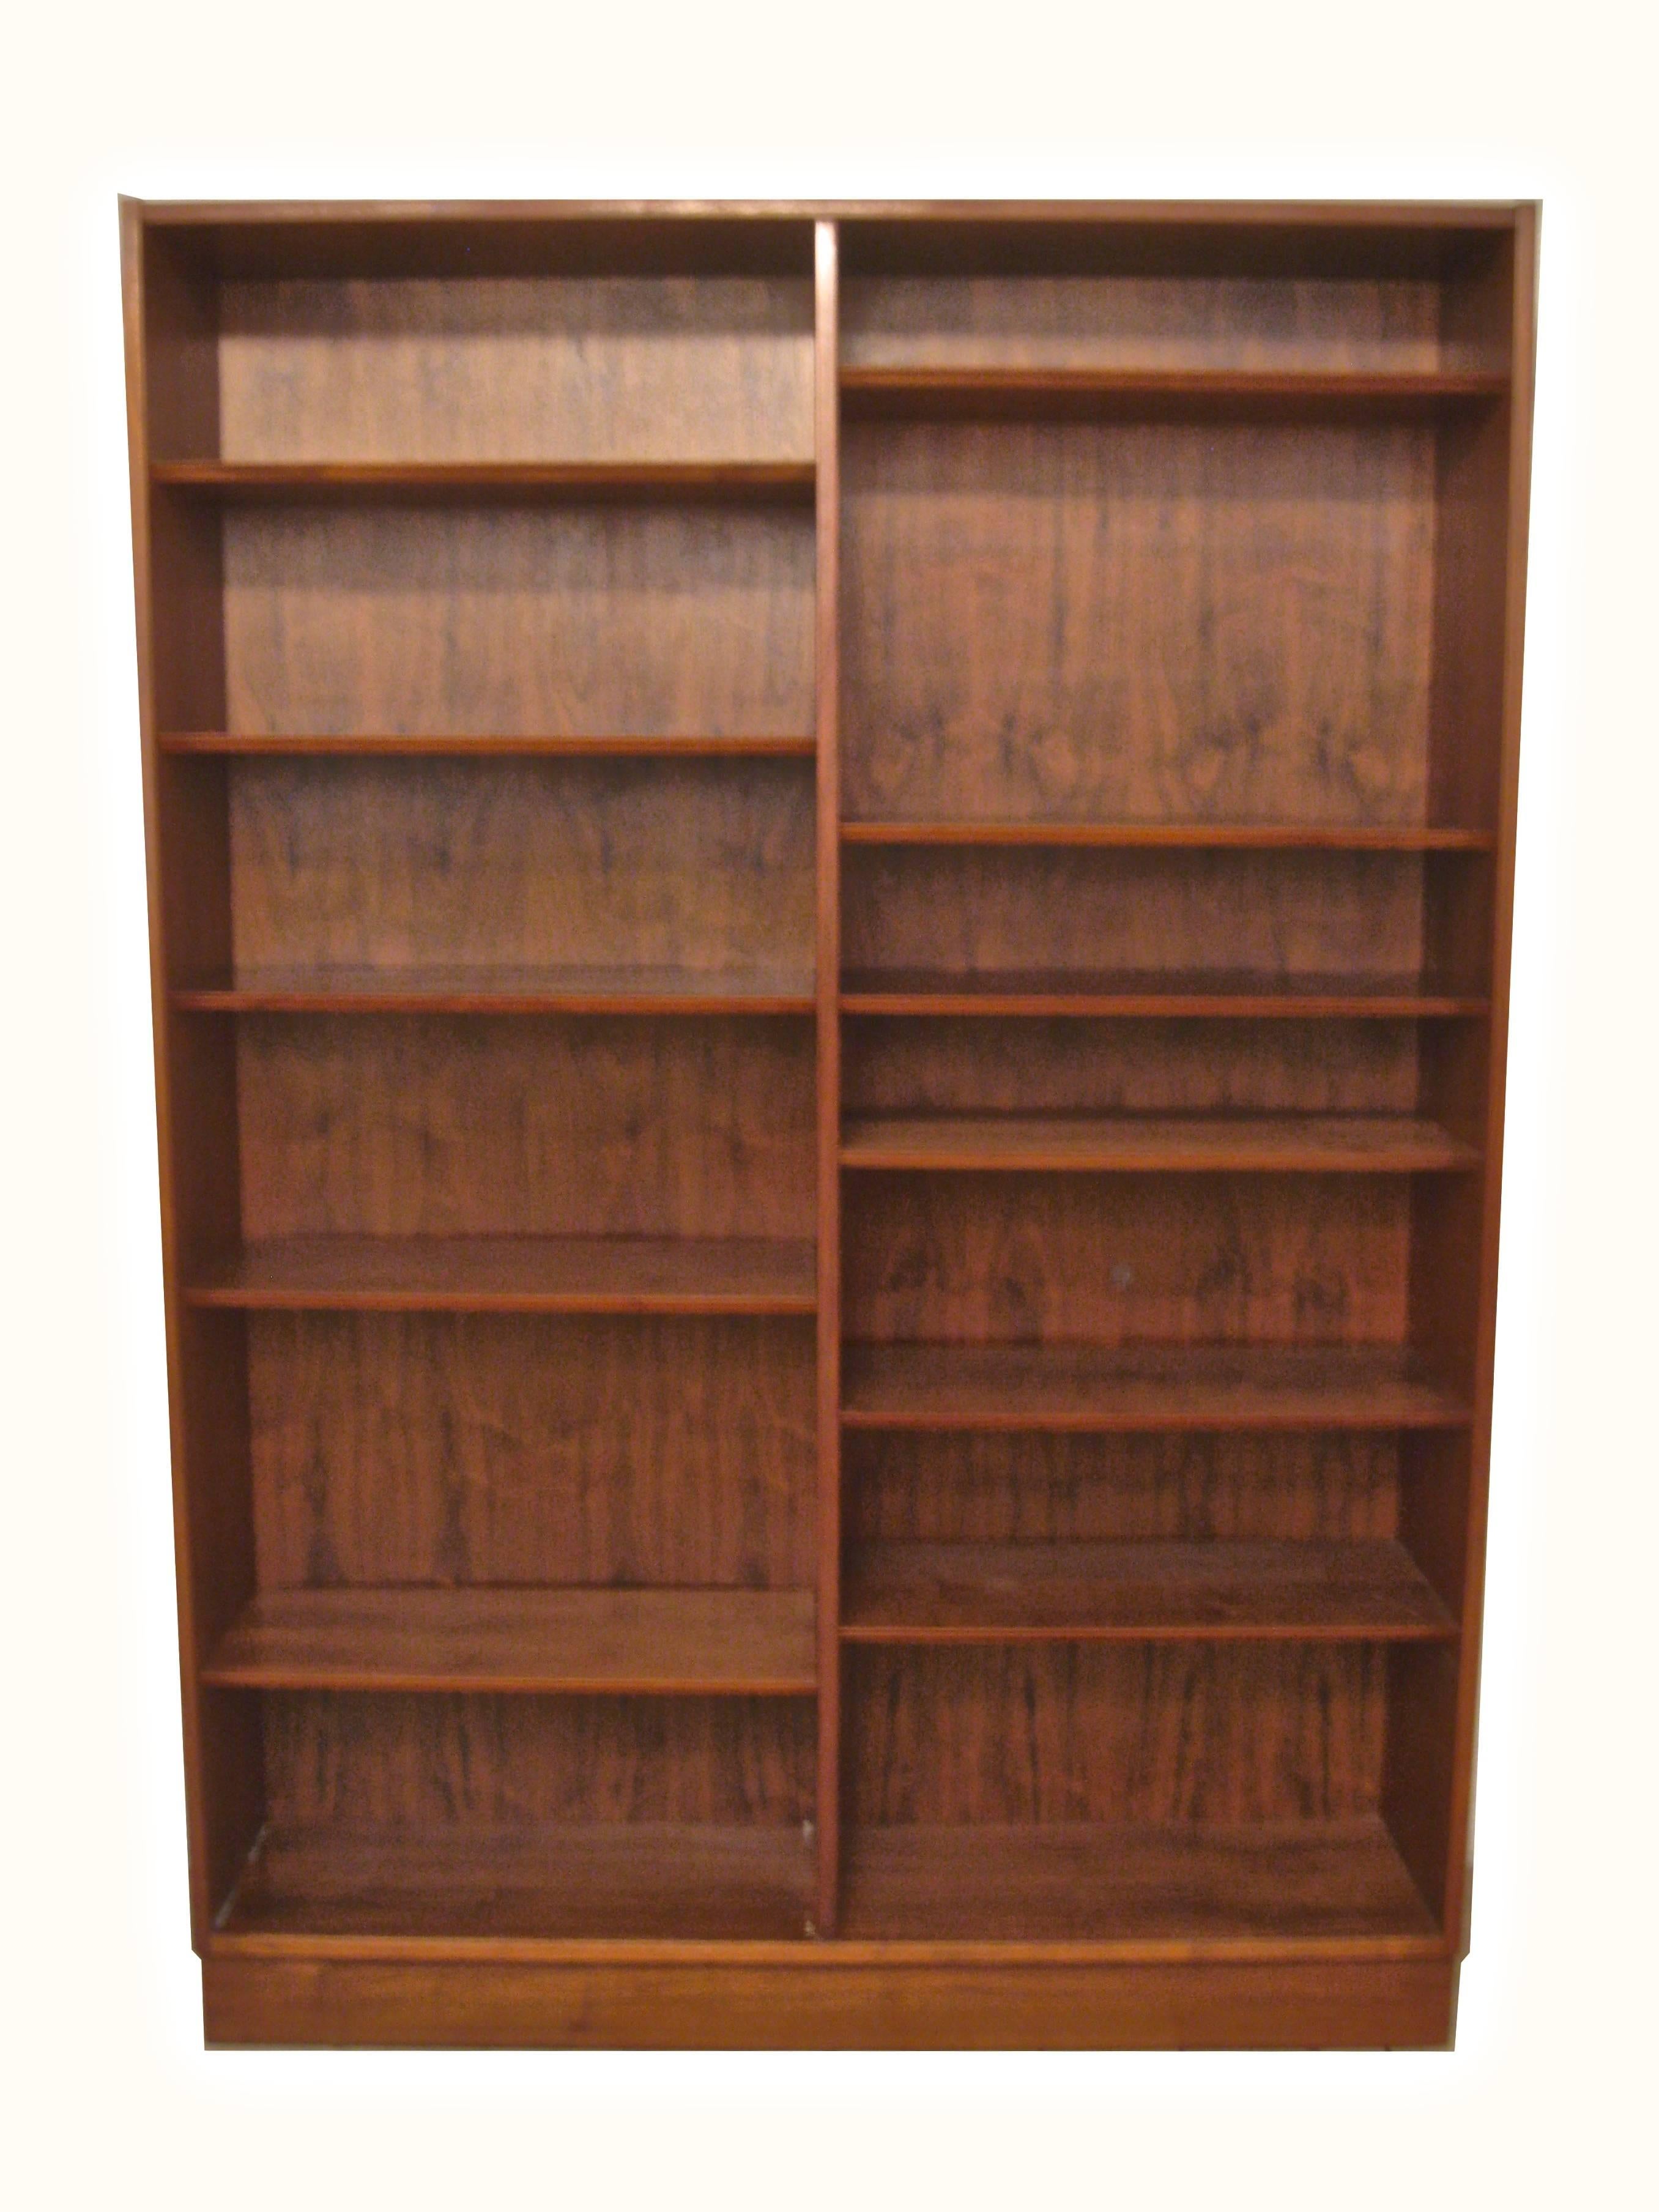 Made of wonderfully figured teak veneers. Solid wood construction. Two fixed shelves surrounded by ten adjustable shelves. The shelves are adjusted with hidden metal wire pins. One deep shelf for electronic devices with two holes for snaking wires.